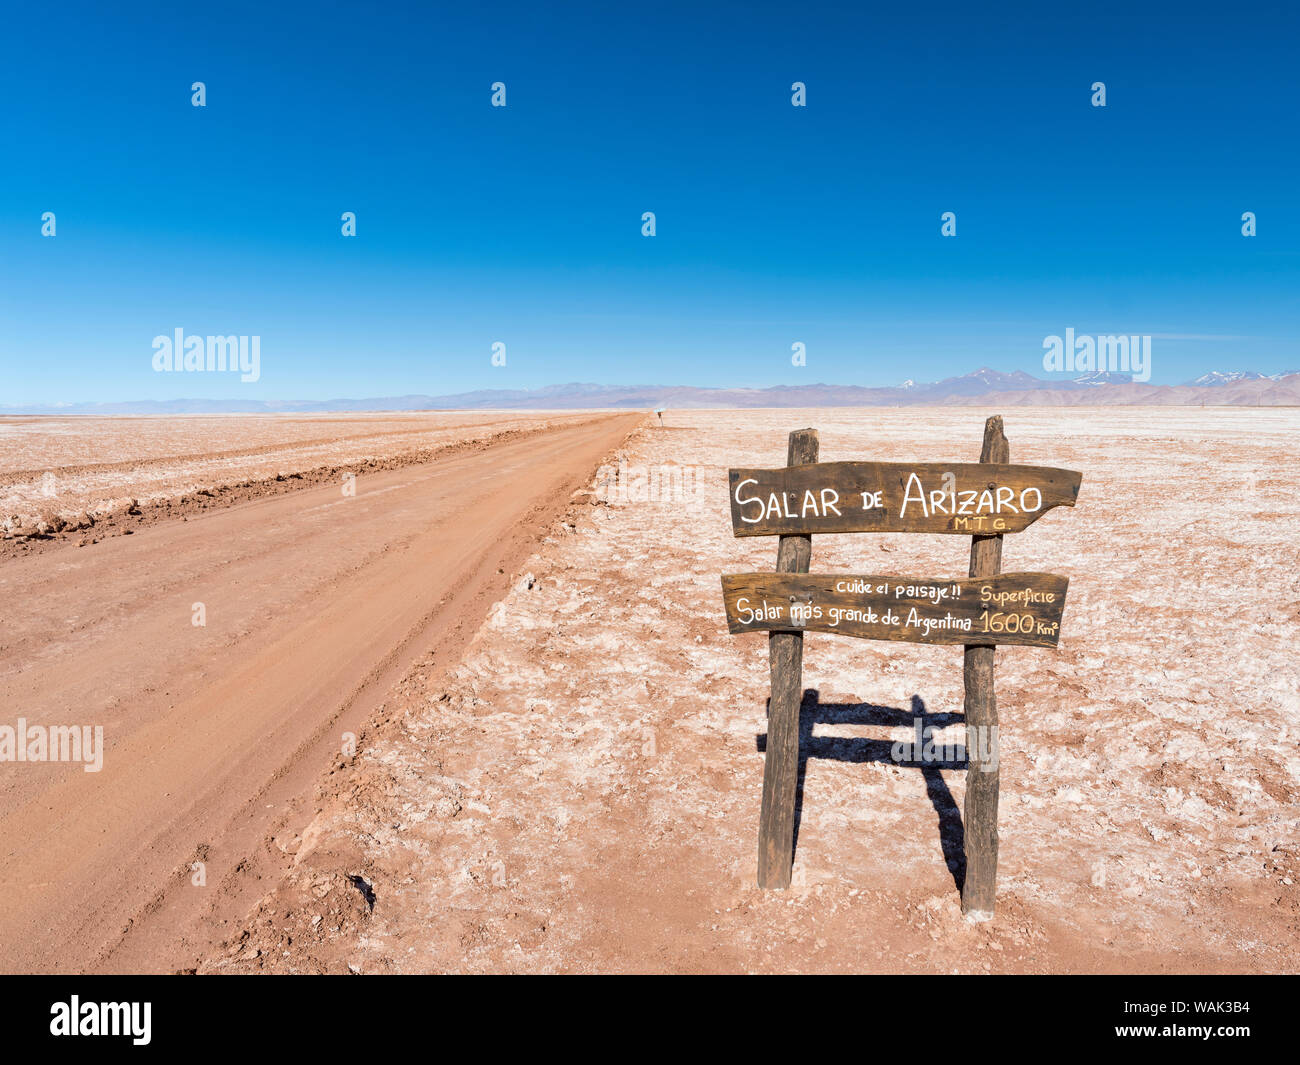 Salar de Arizaro, one of the largest salt flats in the world. The Altiplano, near the village of Tolar Grande, close to the border of Chile. South America, Argentina Stock Photo